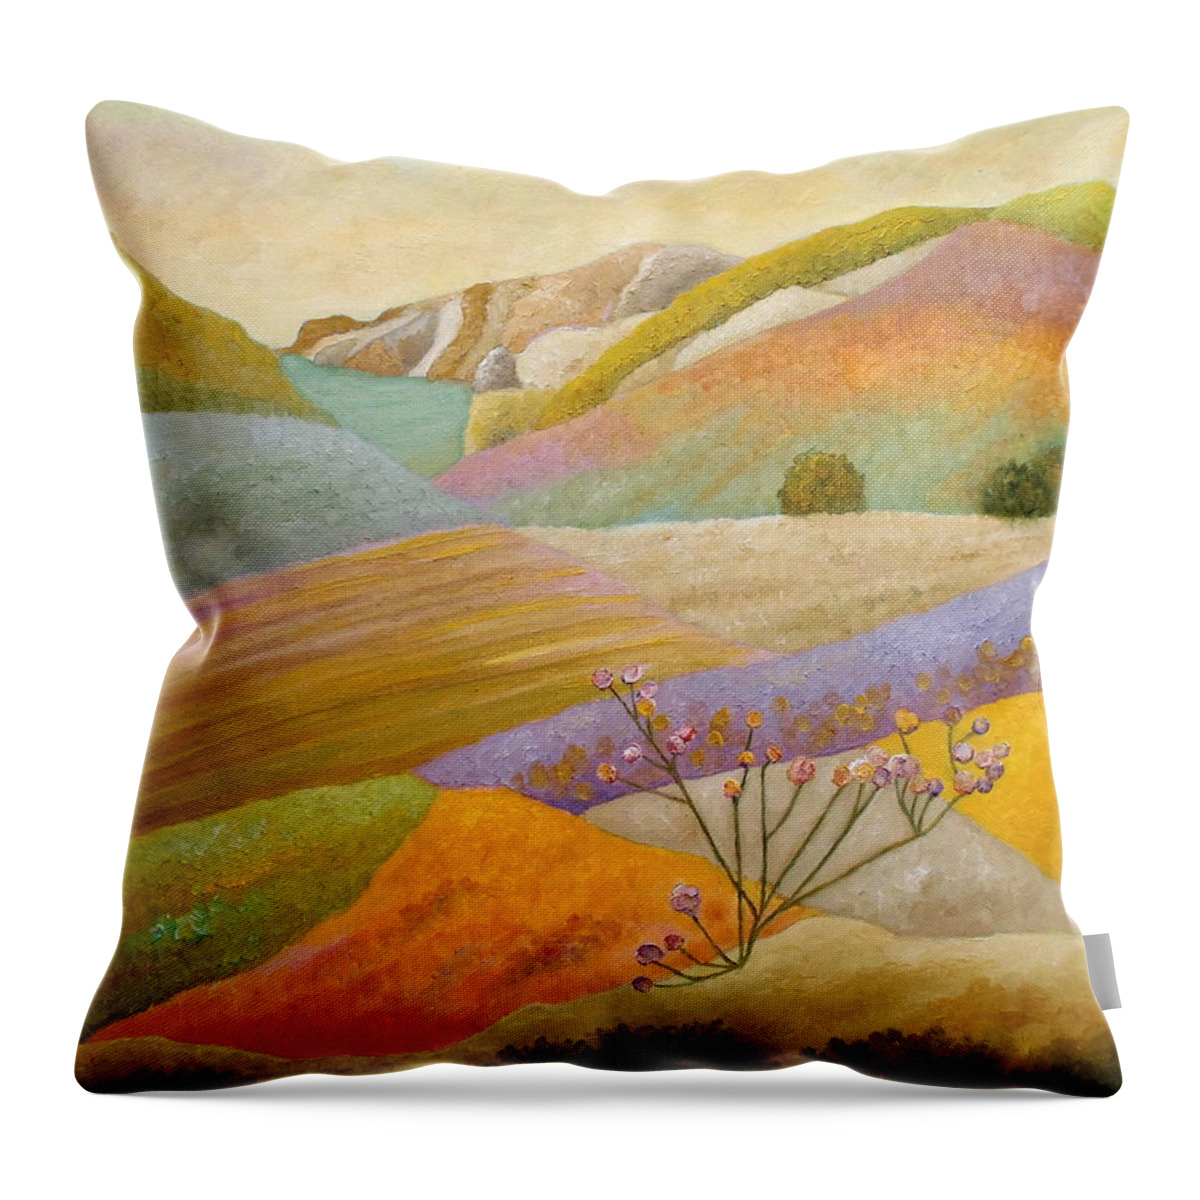 Seascape Throw Pillow featuring the painting Rambling Through The Blooming Valley by Angeles M Pomata